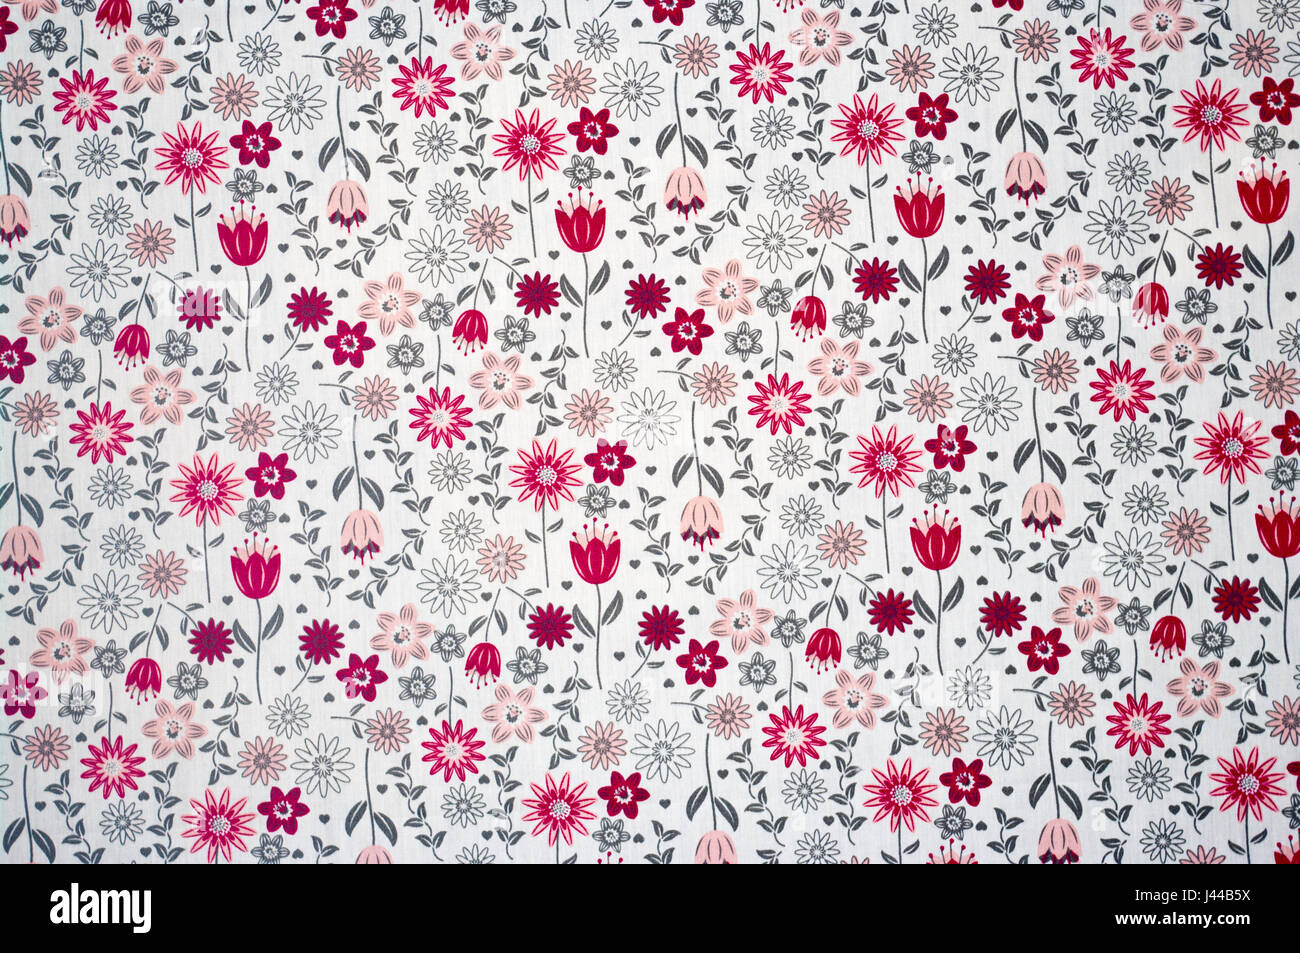 Pink Red and Black Floral Repetative Pattern On a White Background Stock Photo